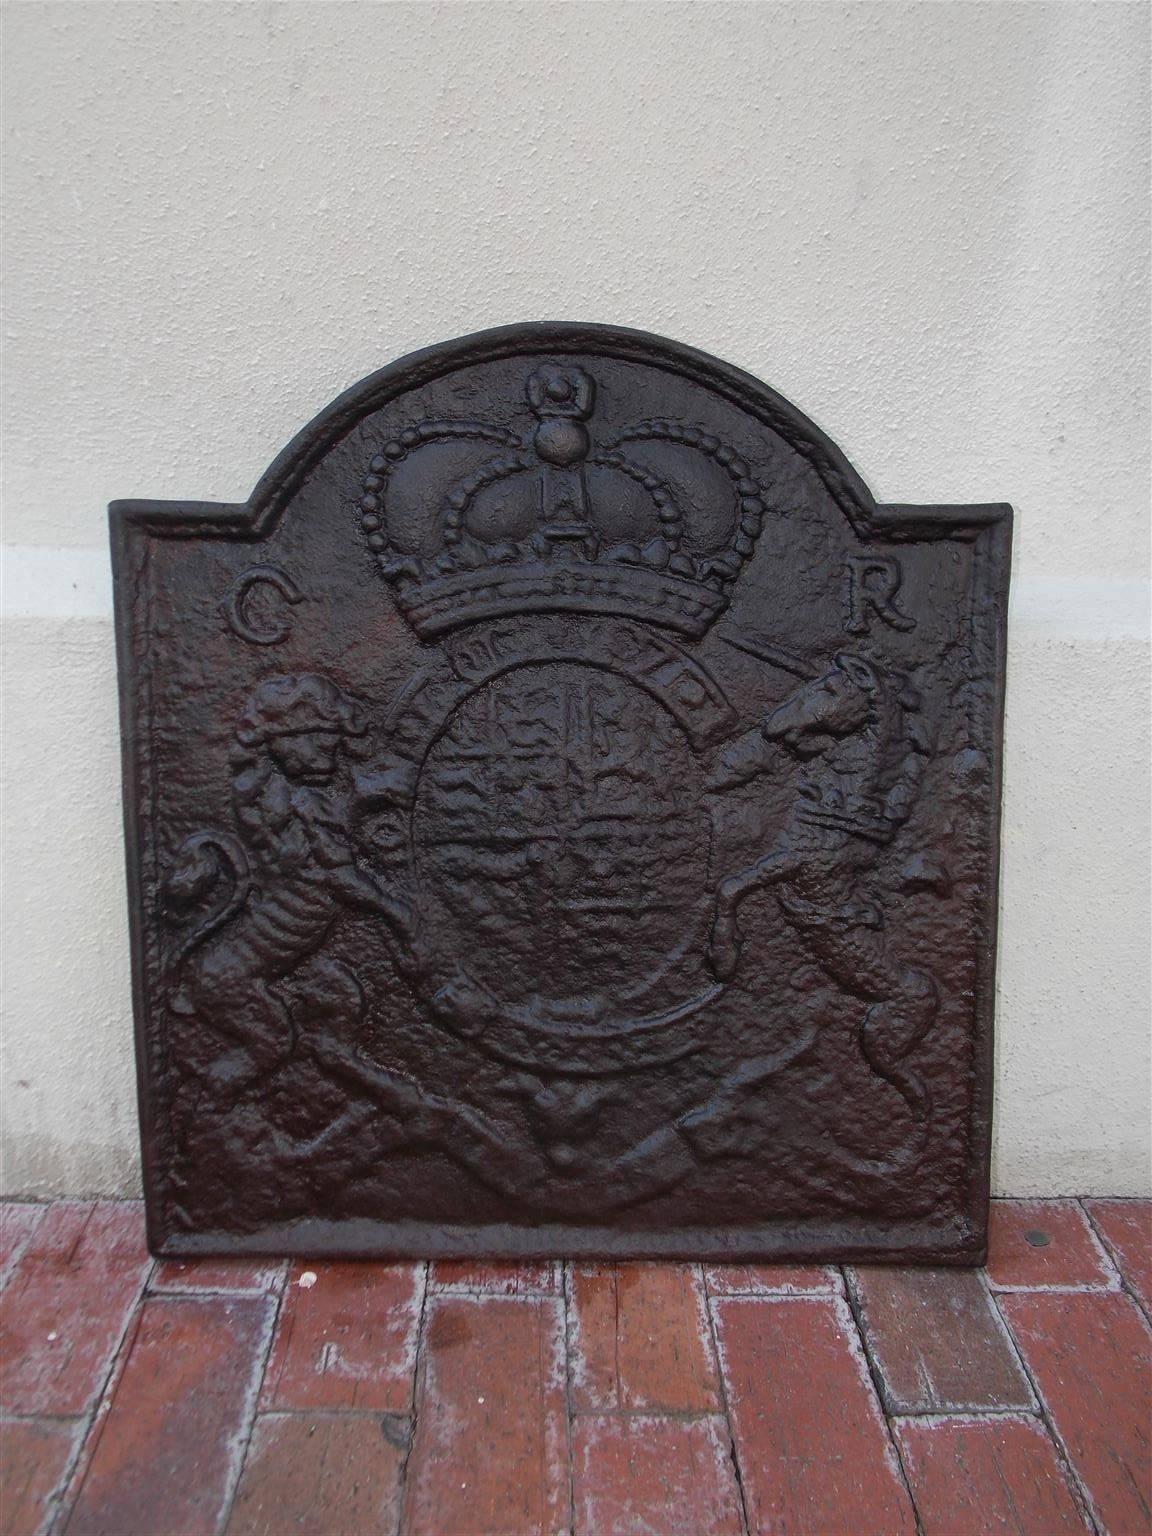 English cast iron fireback with a centered royal coat of arms flanked by a lion and unicorn with lower ribbon motif. Casting by Thomas Elsley. Thomas Elsley was a prolific cast iron artist that exported many fire backs in his career, Early 19th